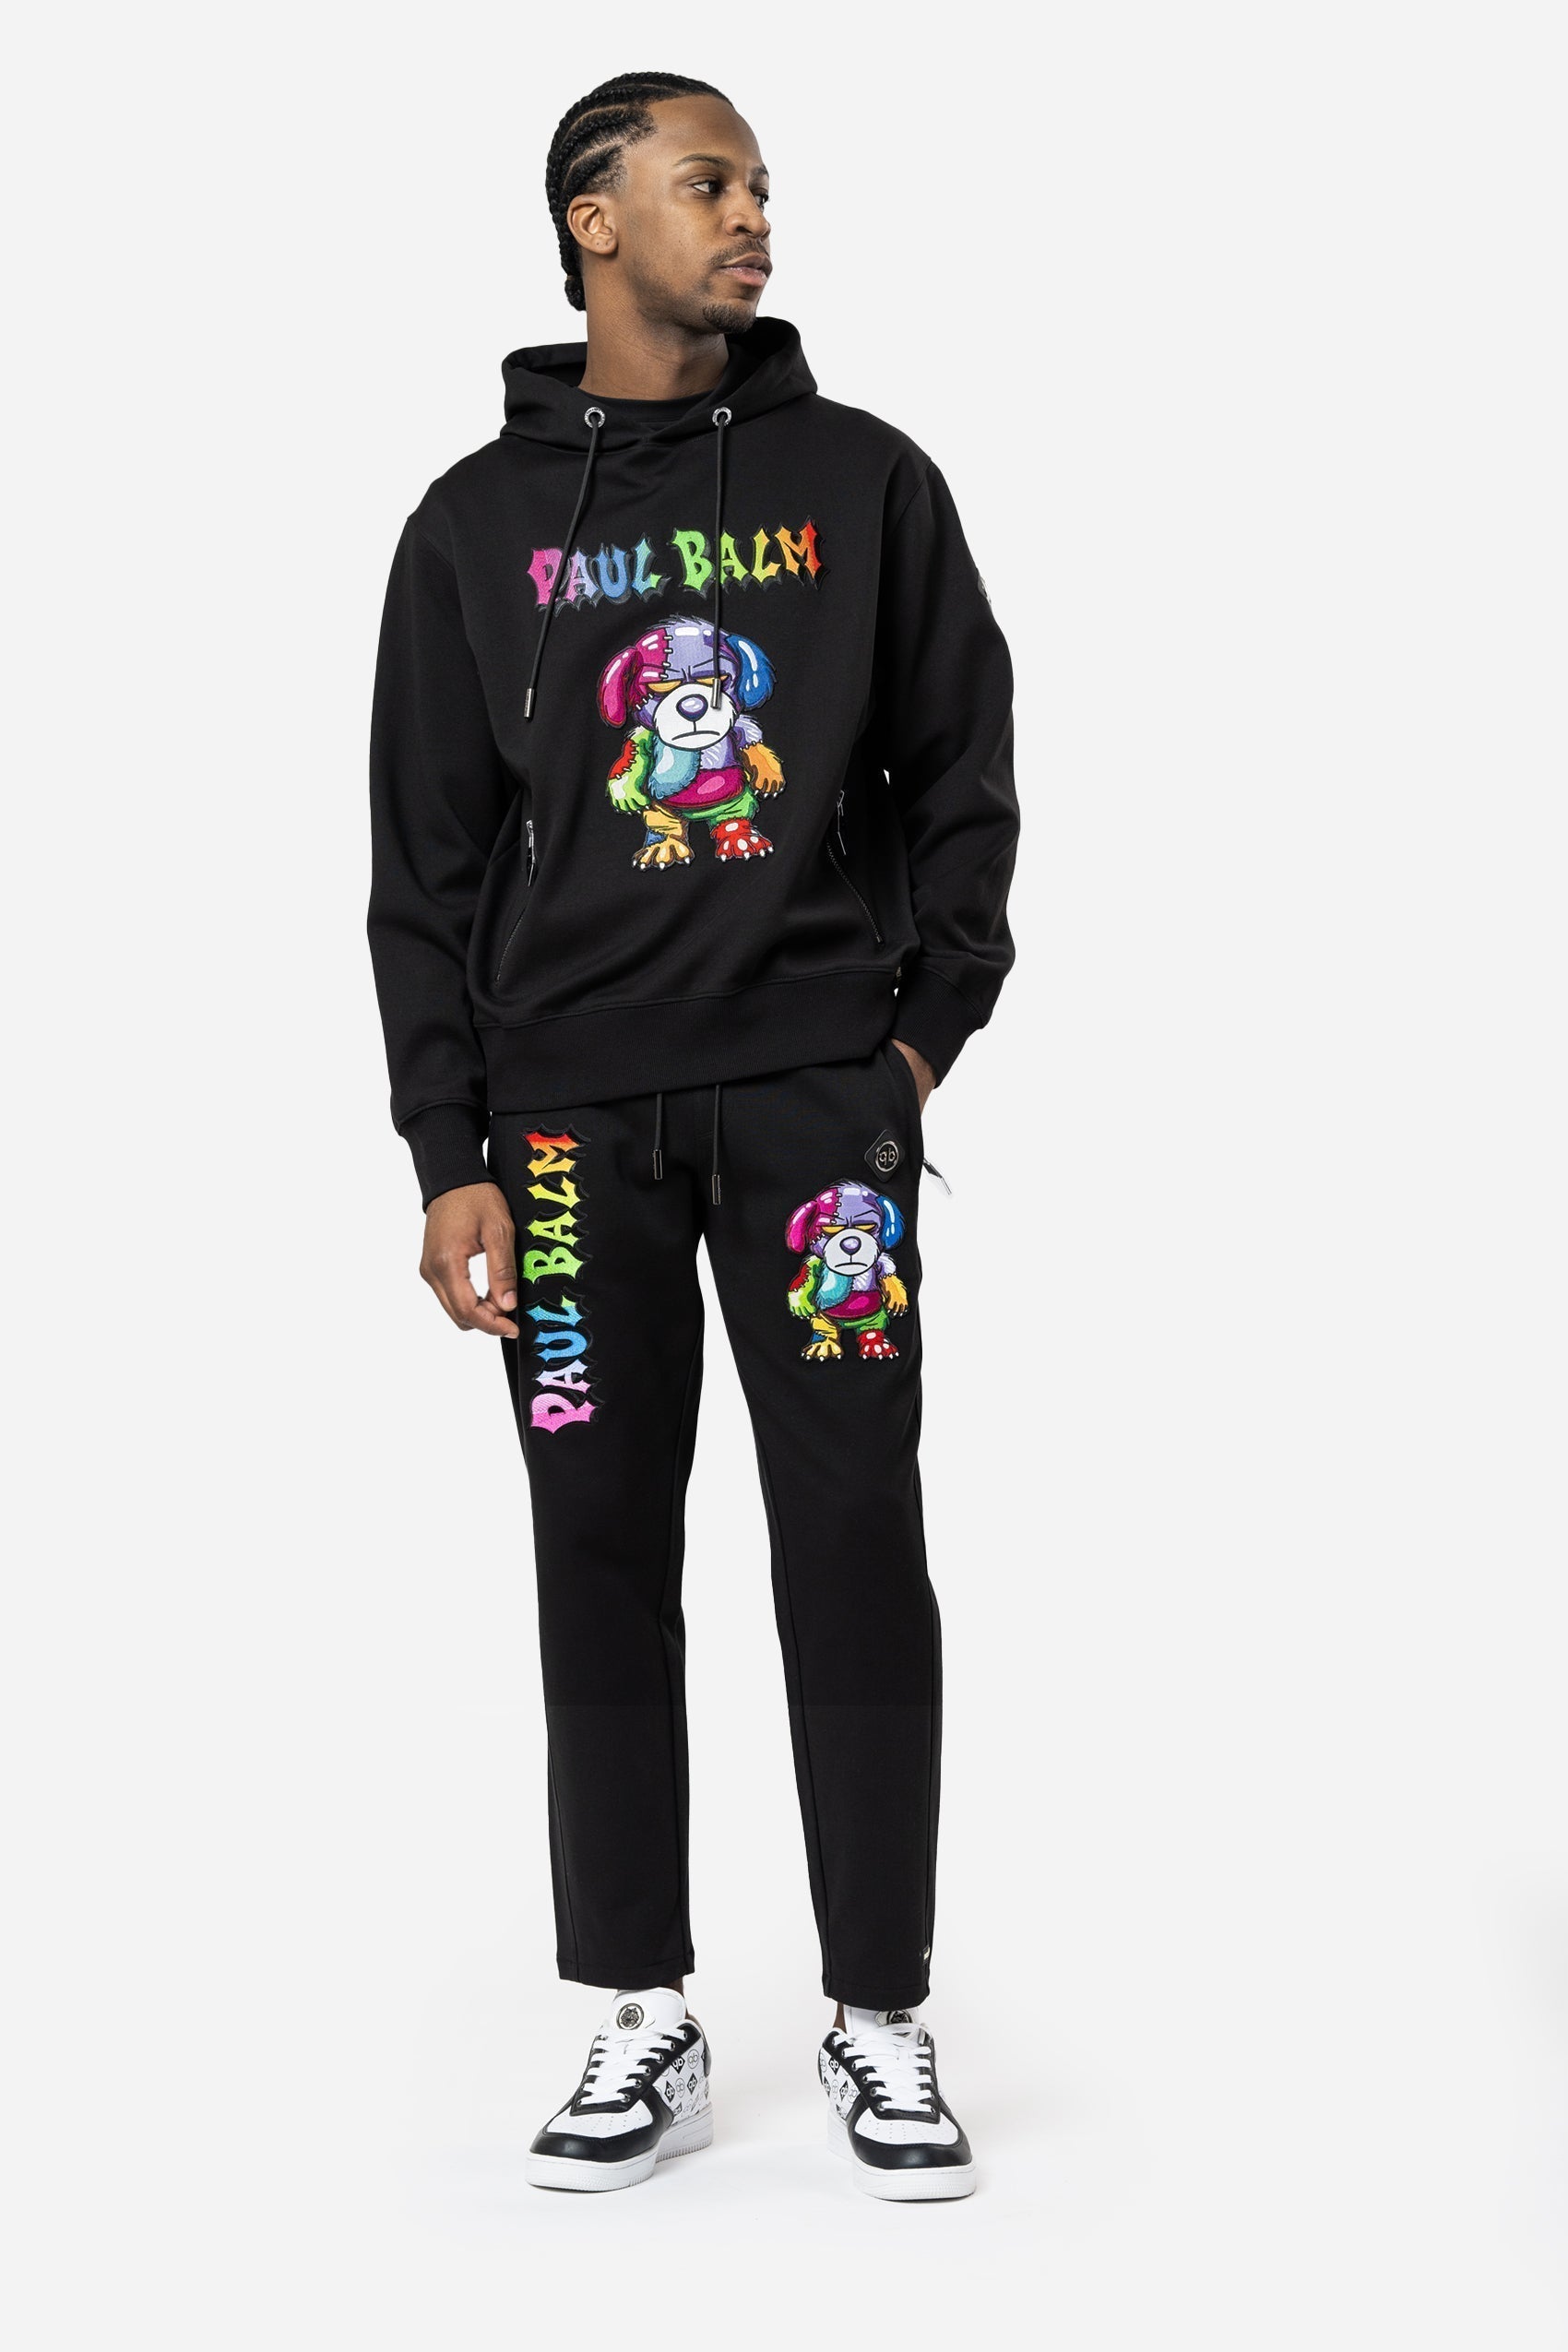 Embroidered Rainbow Kanye Pants - Limited to 300 - PAUL BALM WORLD